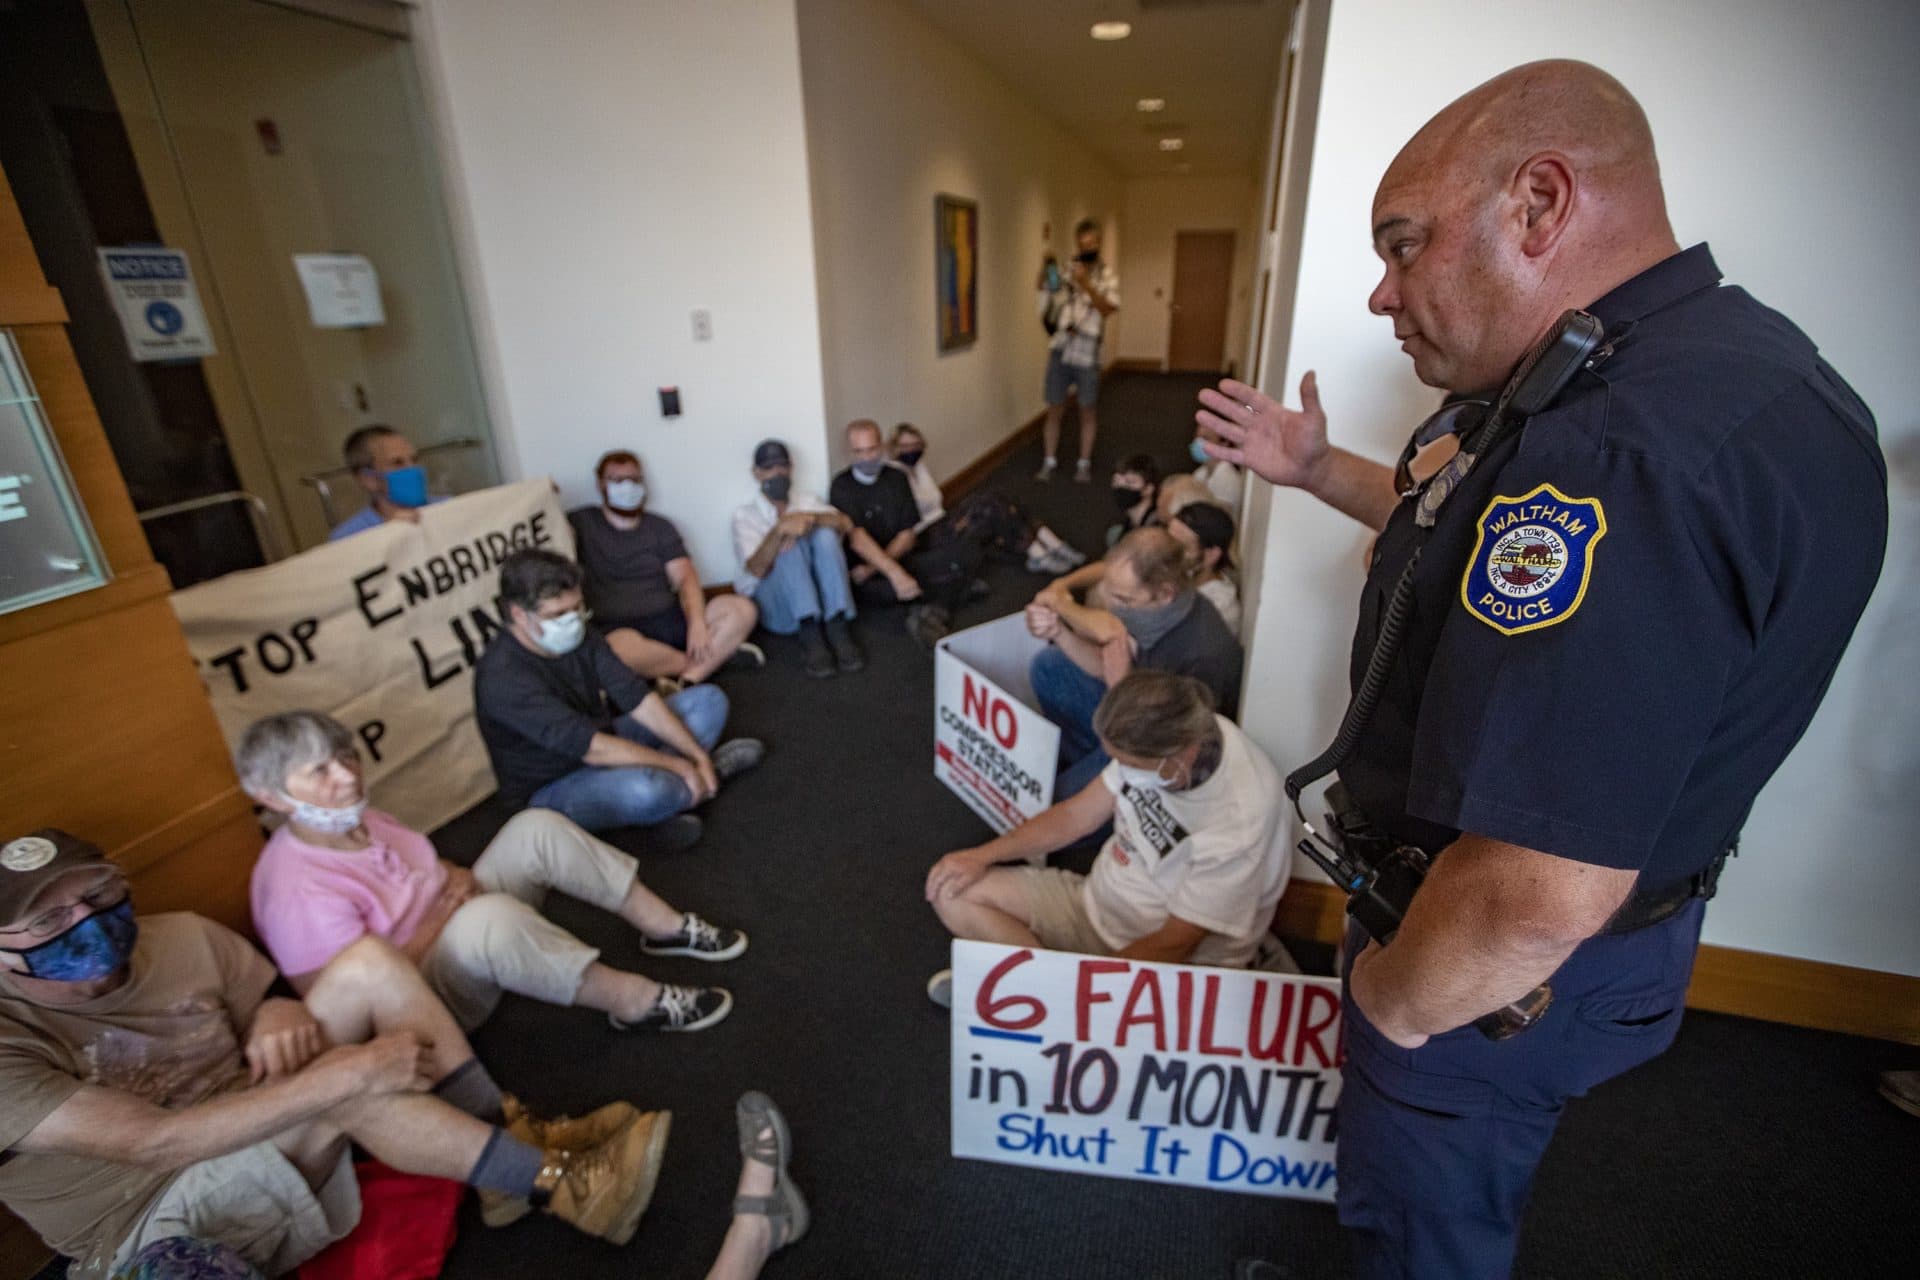 A Waltham police officer speaks with the protesters at the Enbridge office. (Jesse Costa/WBUR)